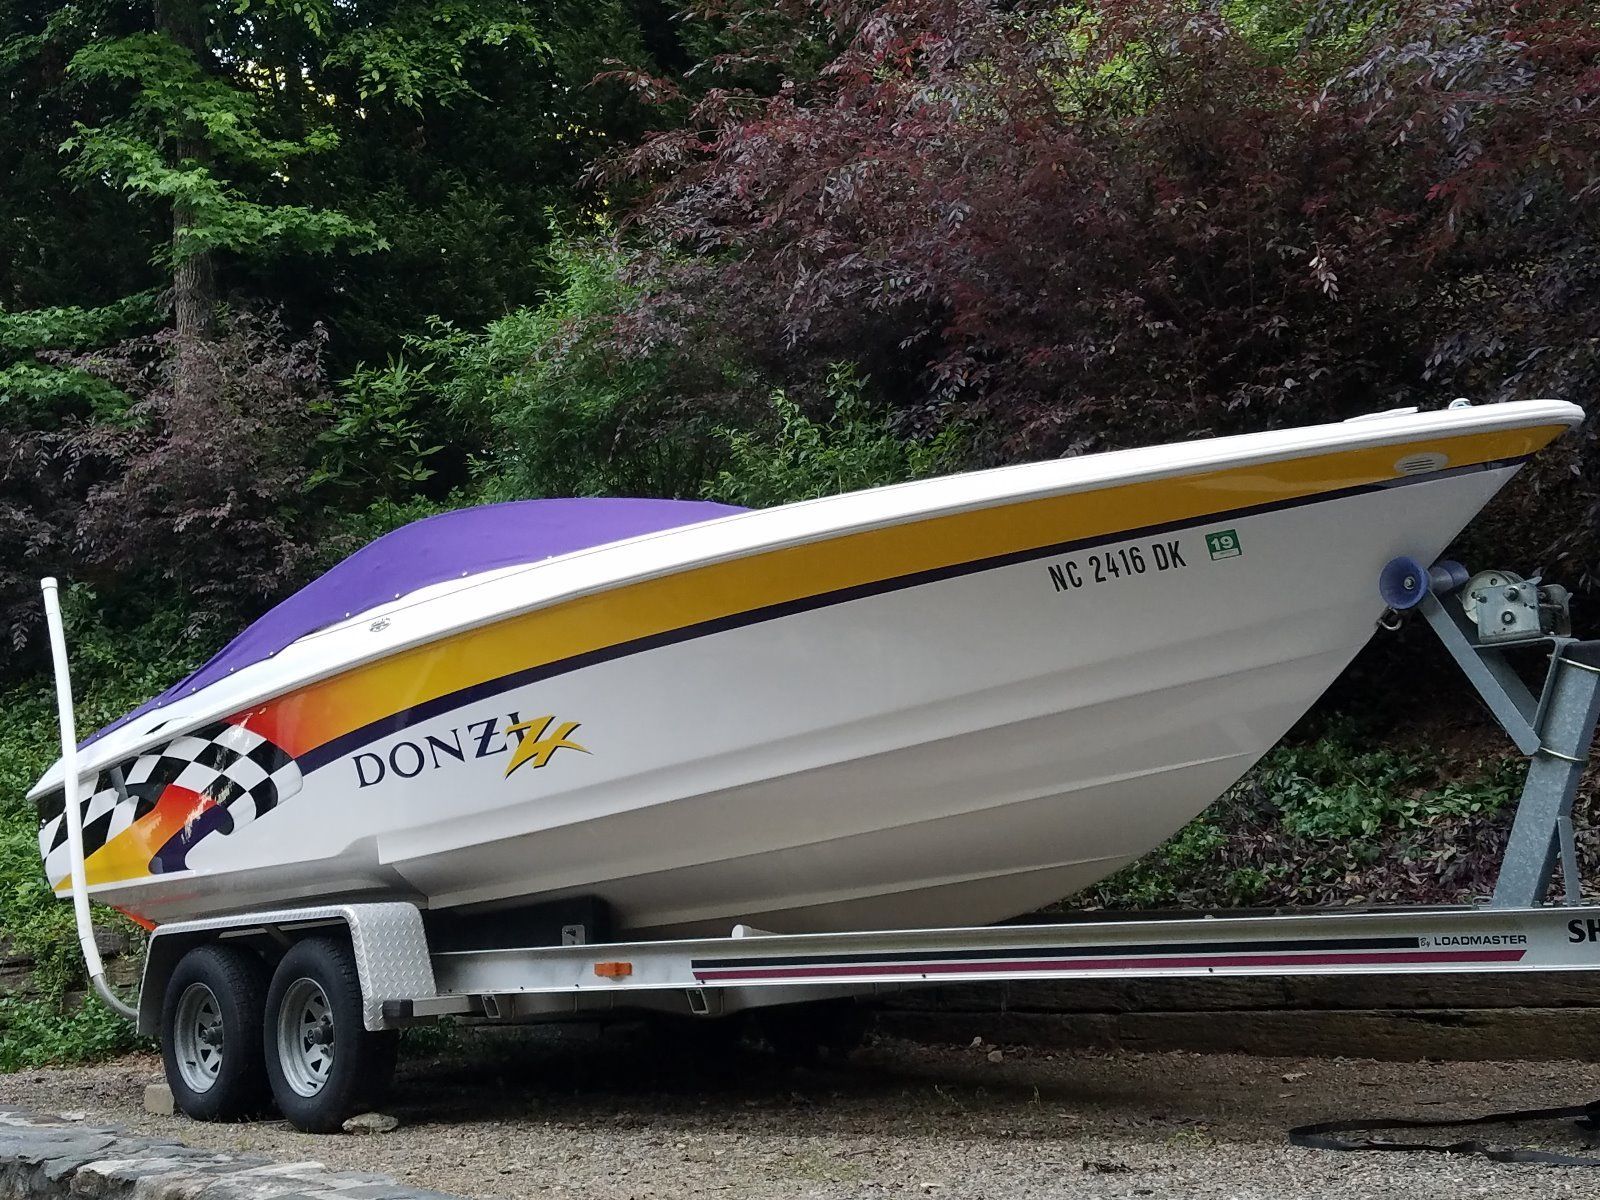 Donzi 22 Zx 2001 for sale for $27,900.